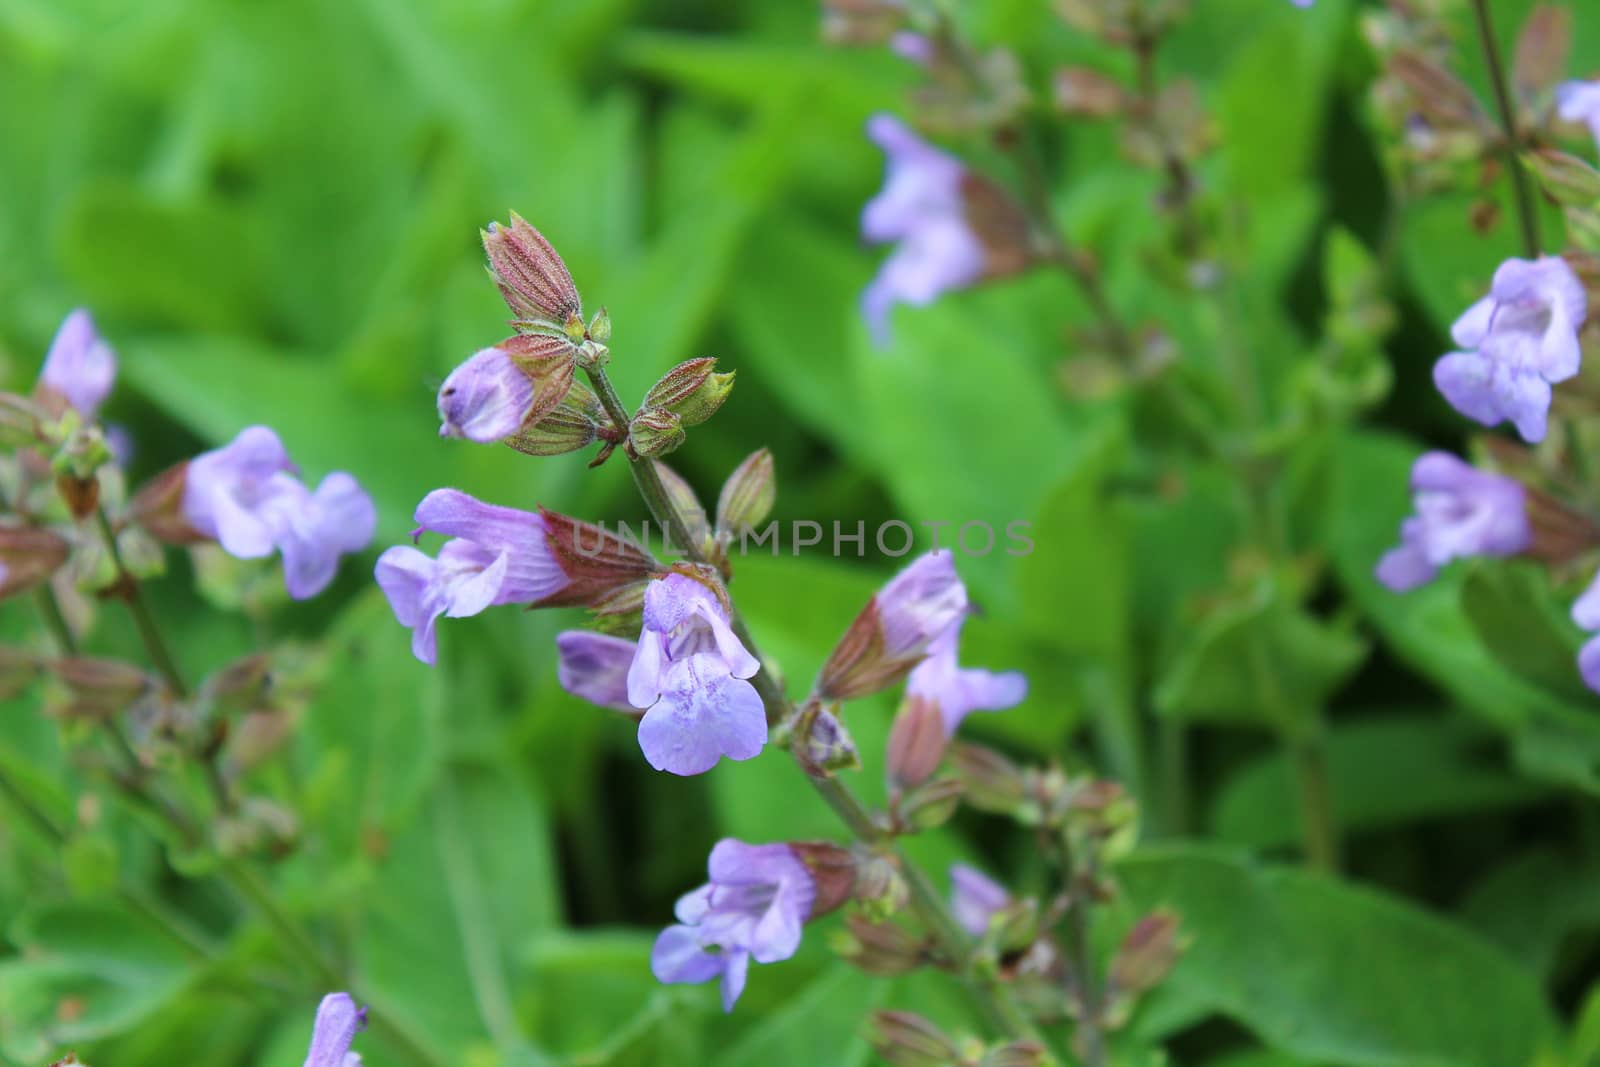 The picture shows a field of meadow sage